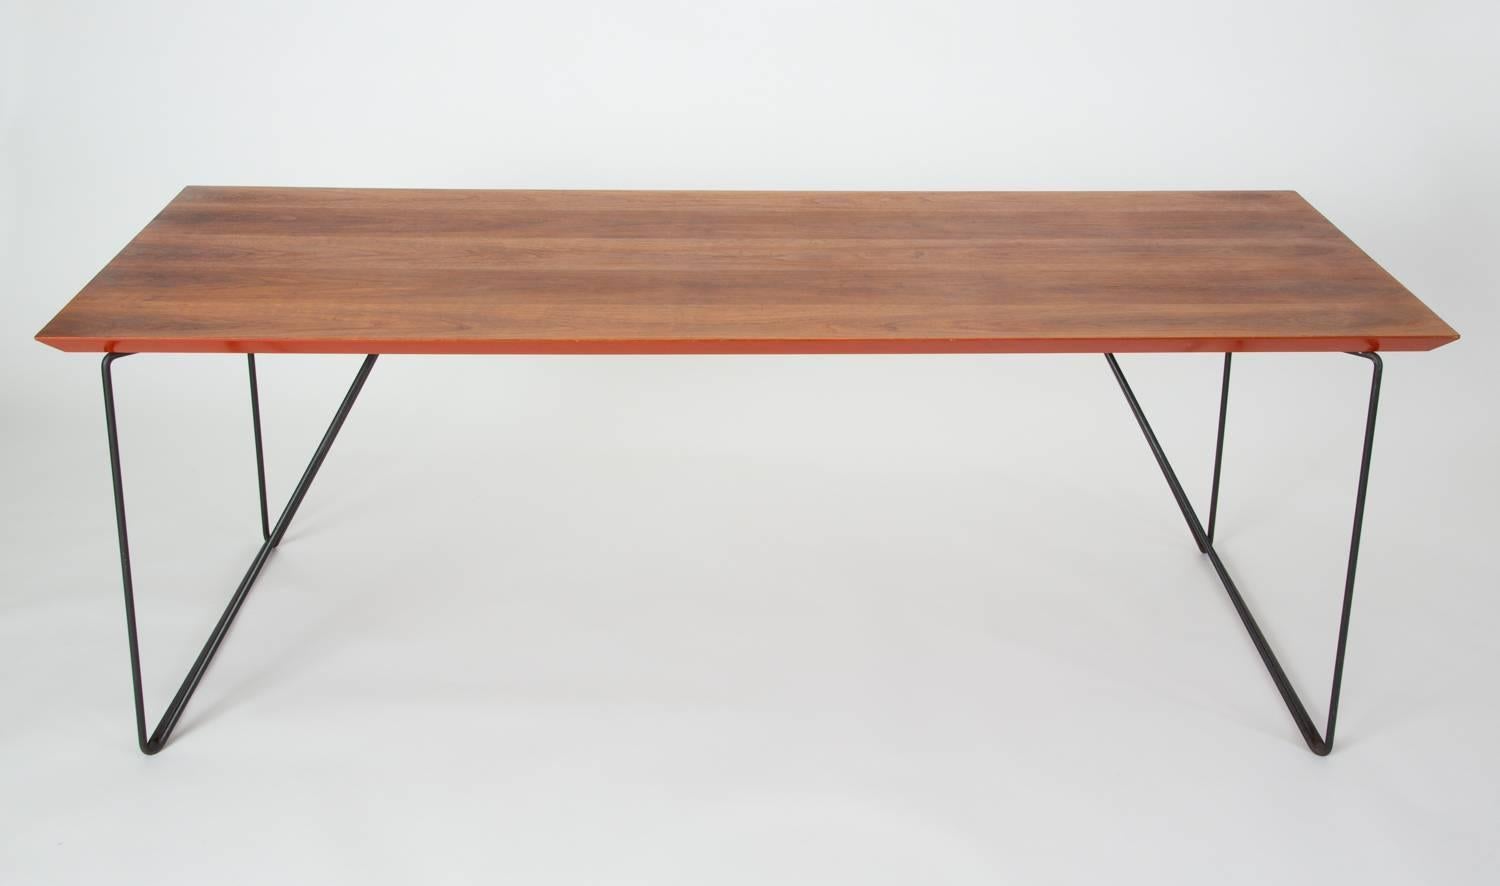 A long dining table, conference table, or desk by California designer Luther Conover. This example has Conover's distinctive polygonal legs - two angled frames in enameled steel - with a custom walnut surface. The tabletop has a back-bevelled edge